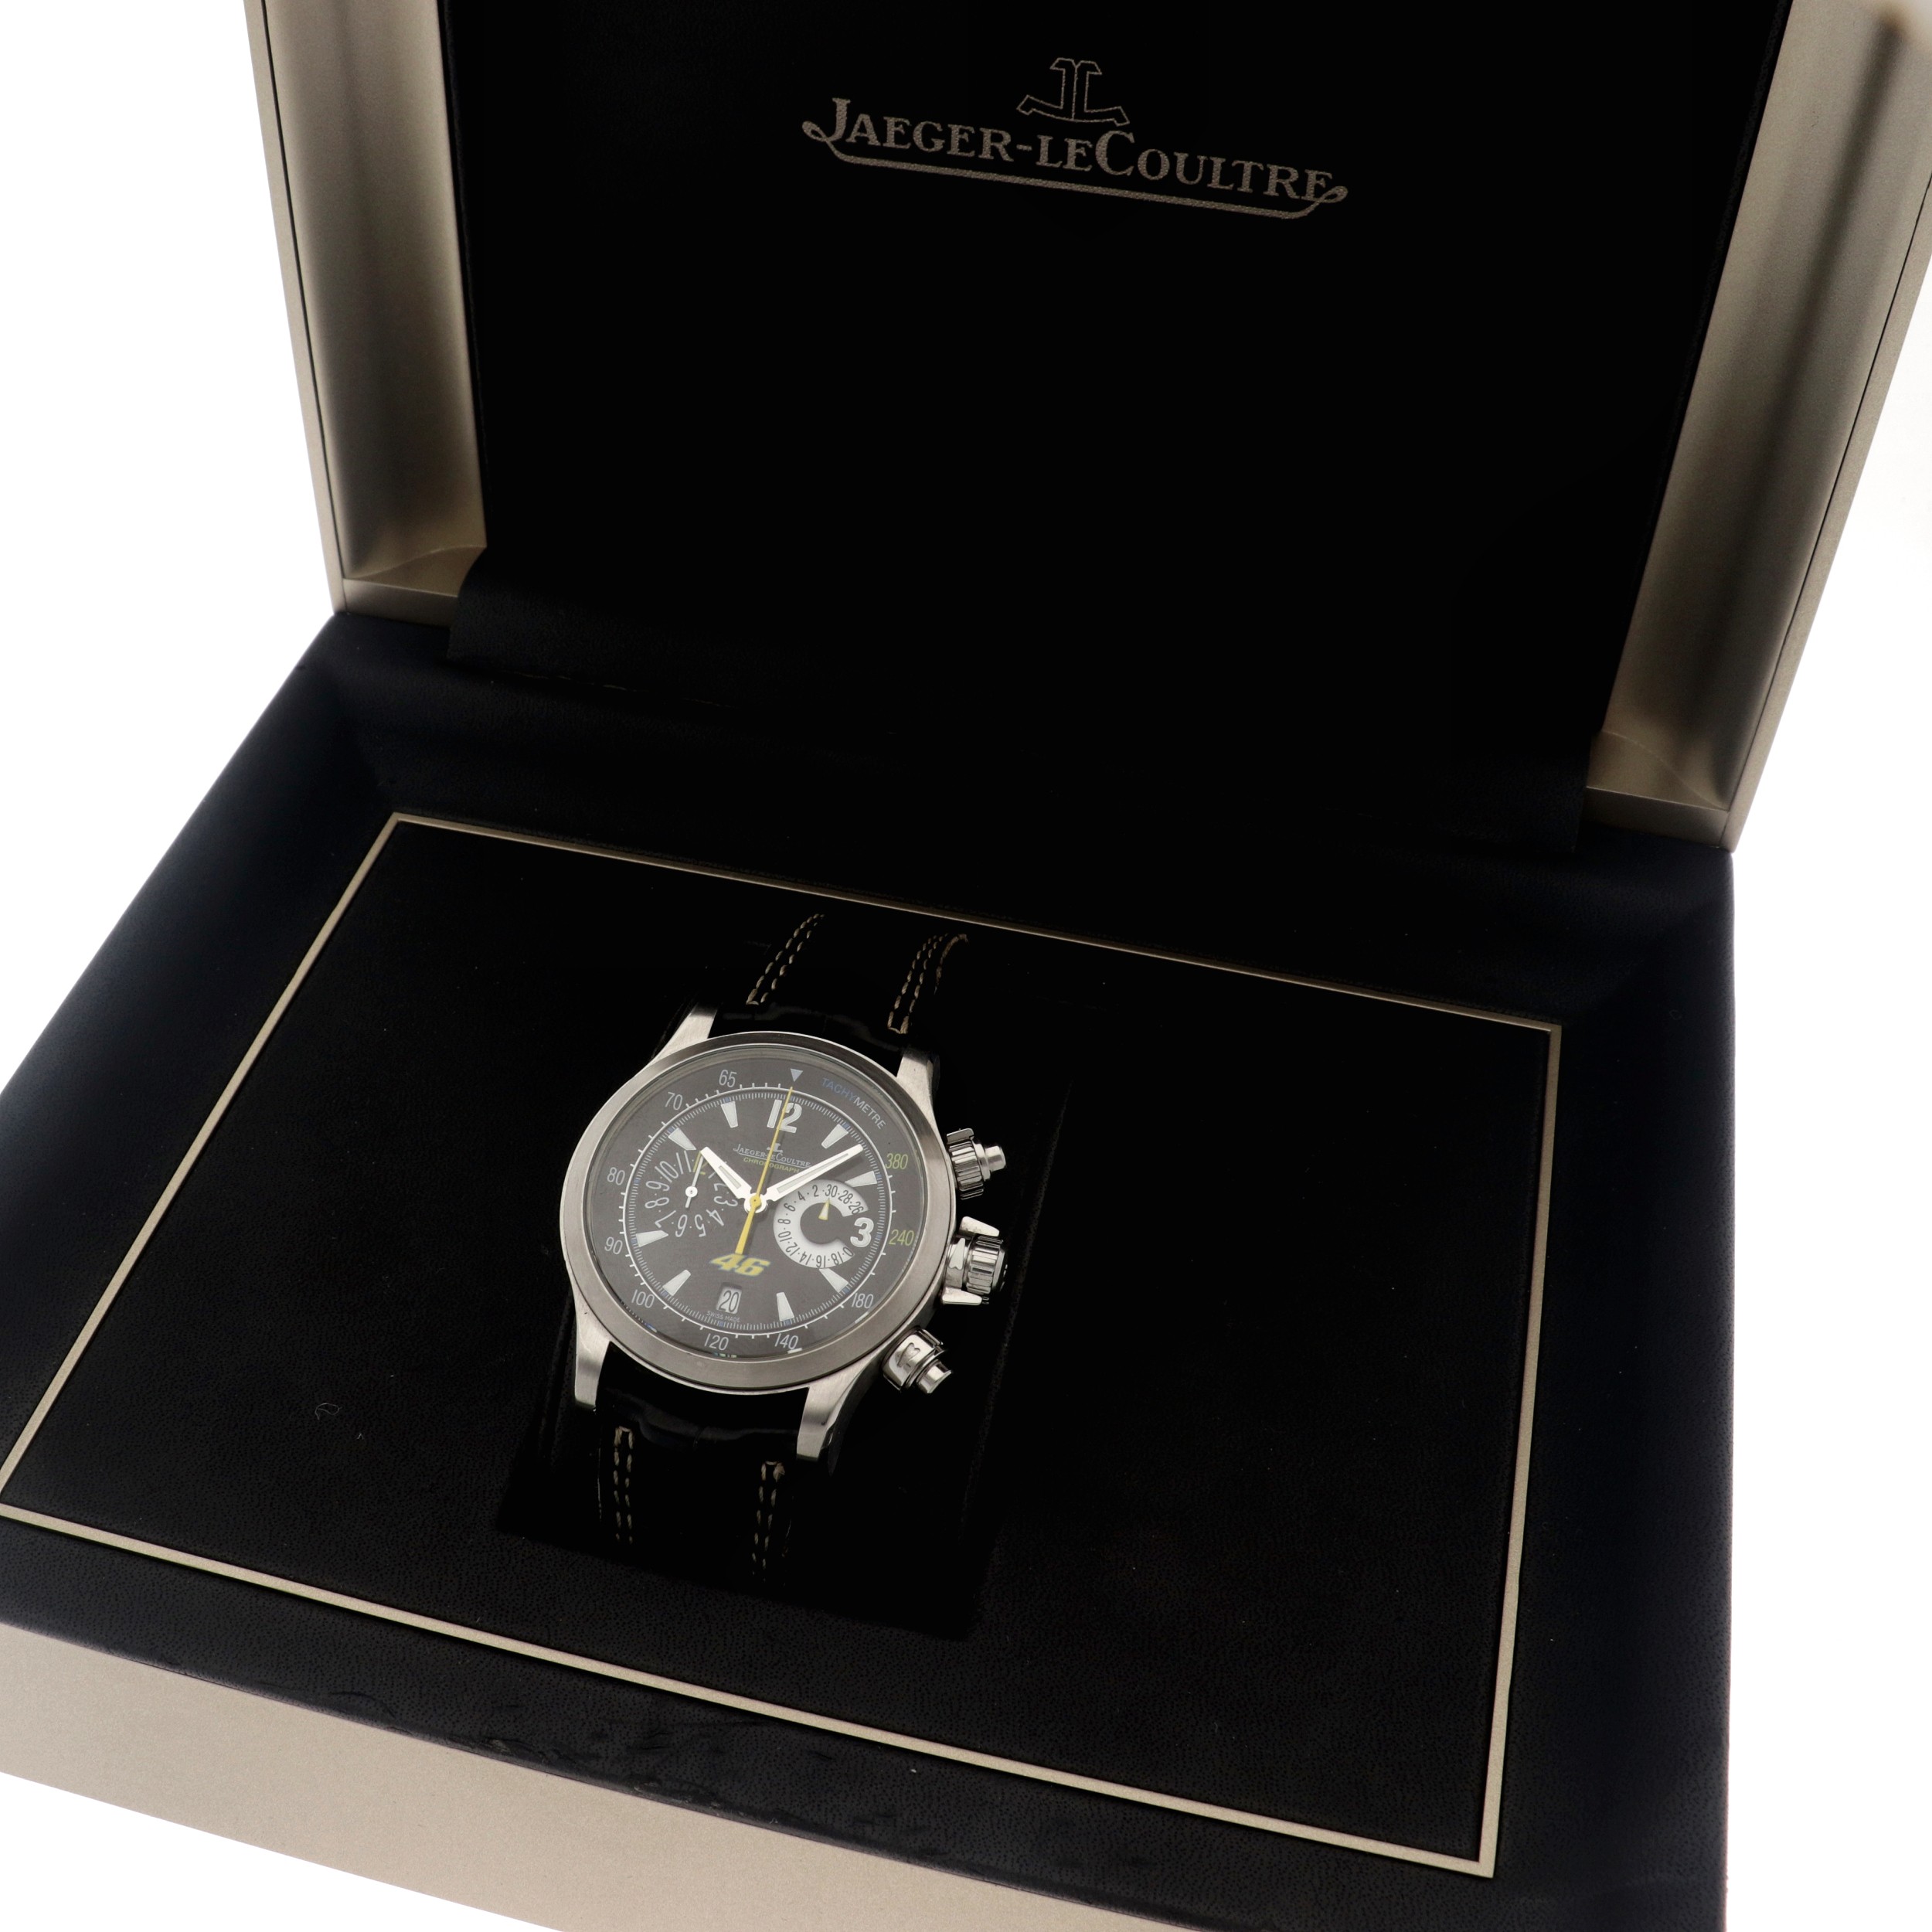 Jaeger-LeCoultre Master Compressor Valentino Rossi Limited Edition 146.8.25 - Men's watch - 2010. - Image 6 of 6